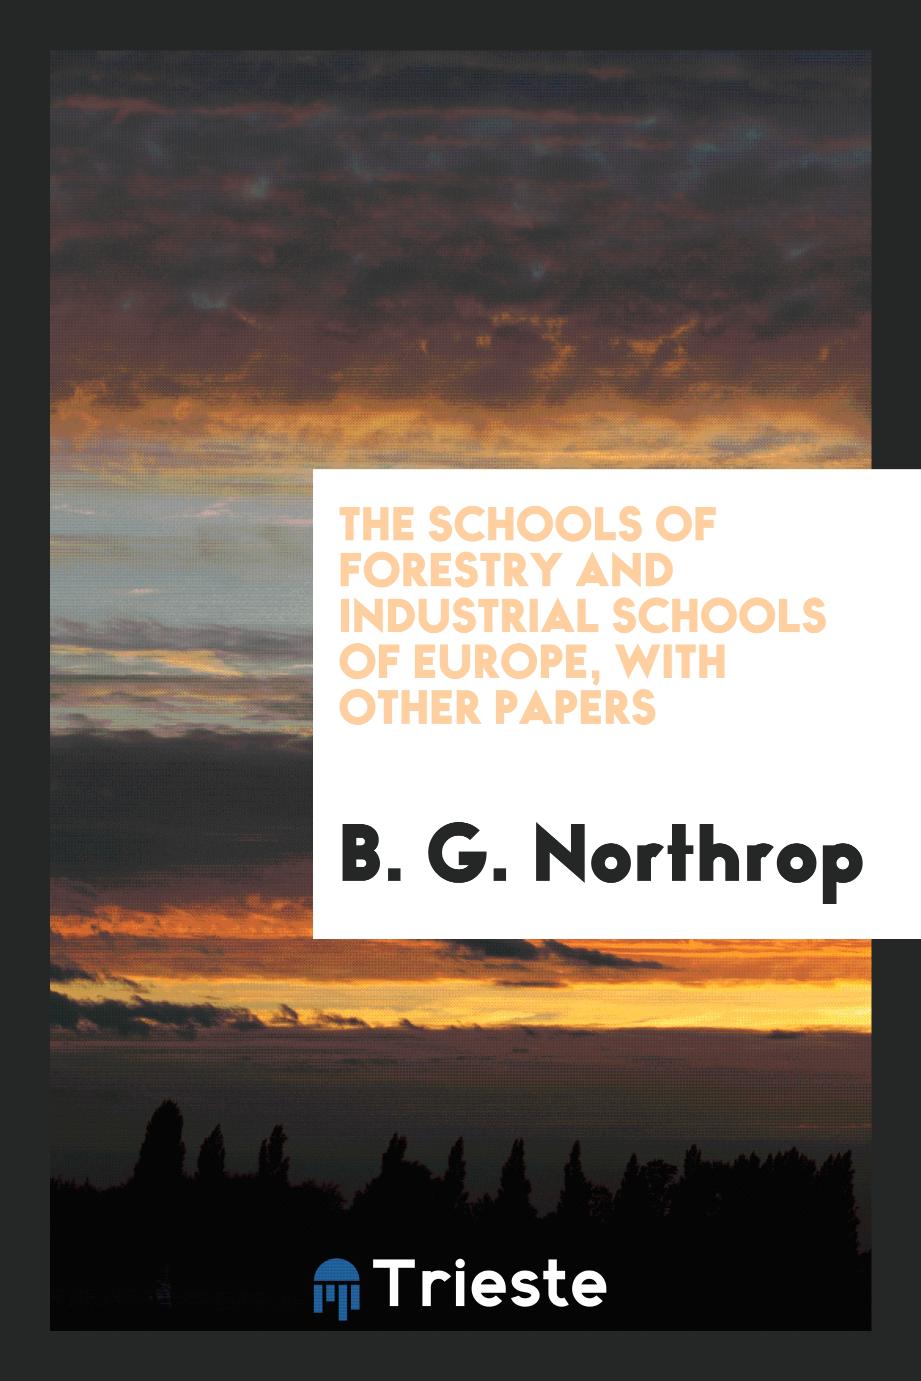 The schools of forestry and industrial schools of Europe, with other papers